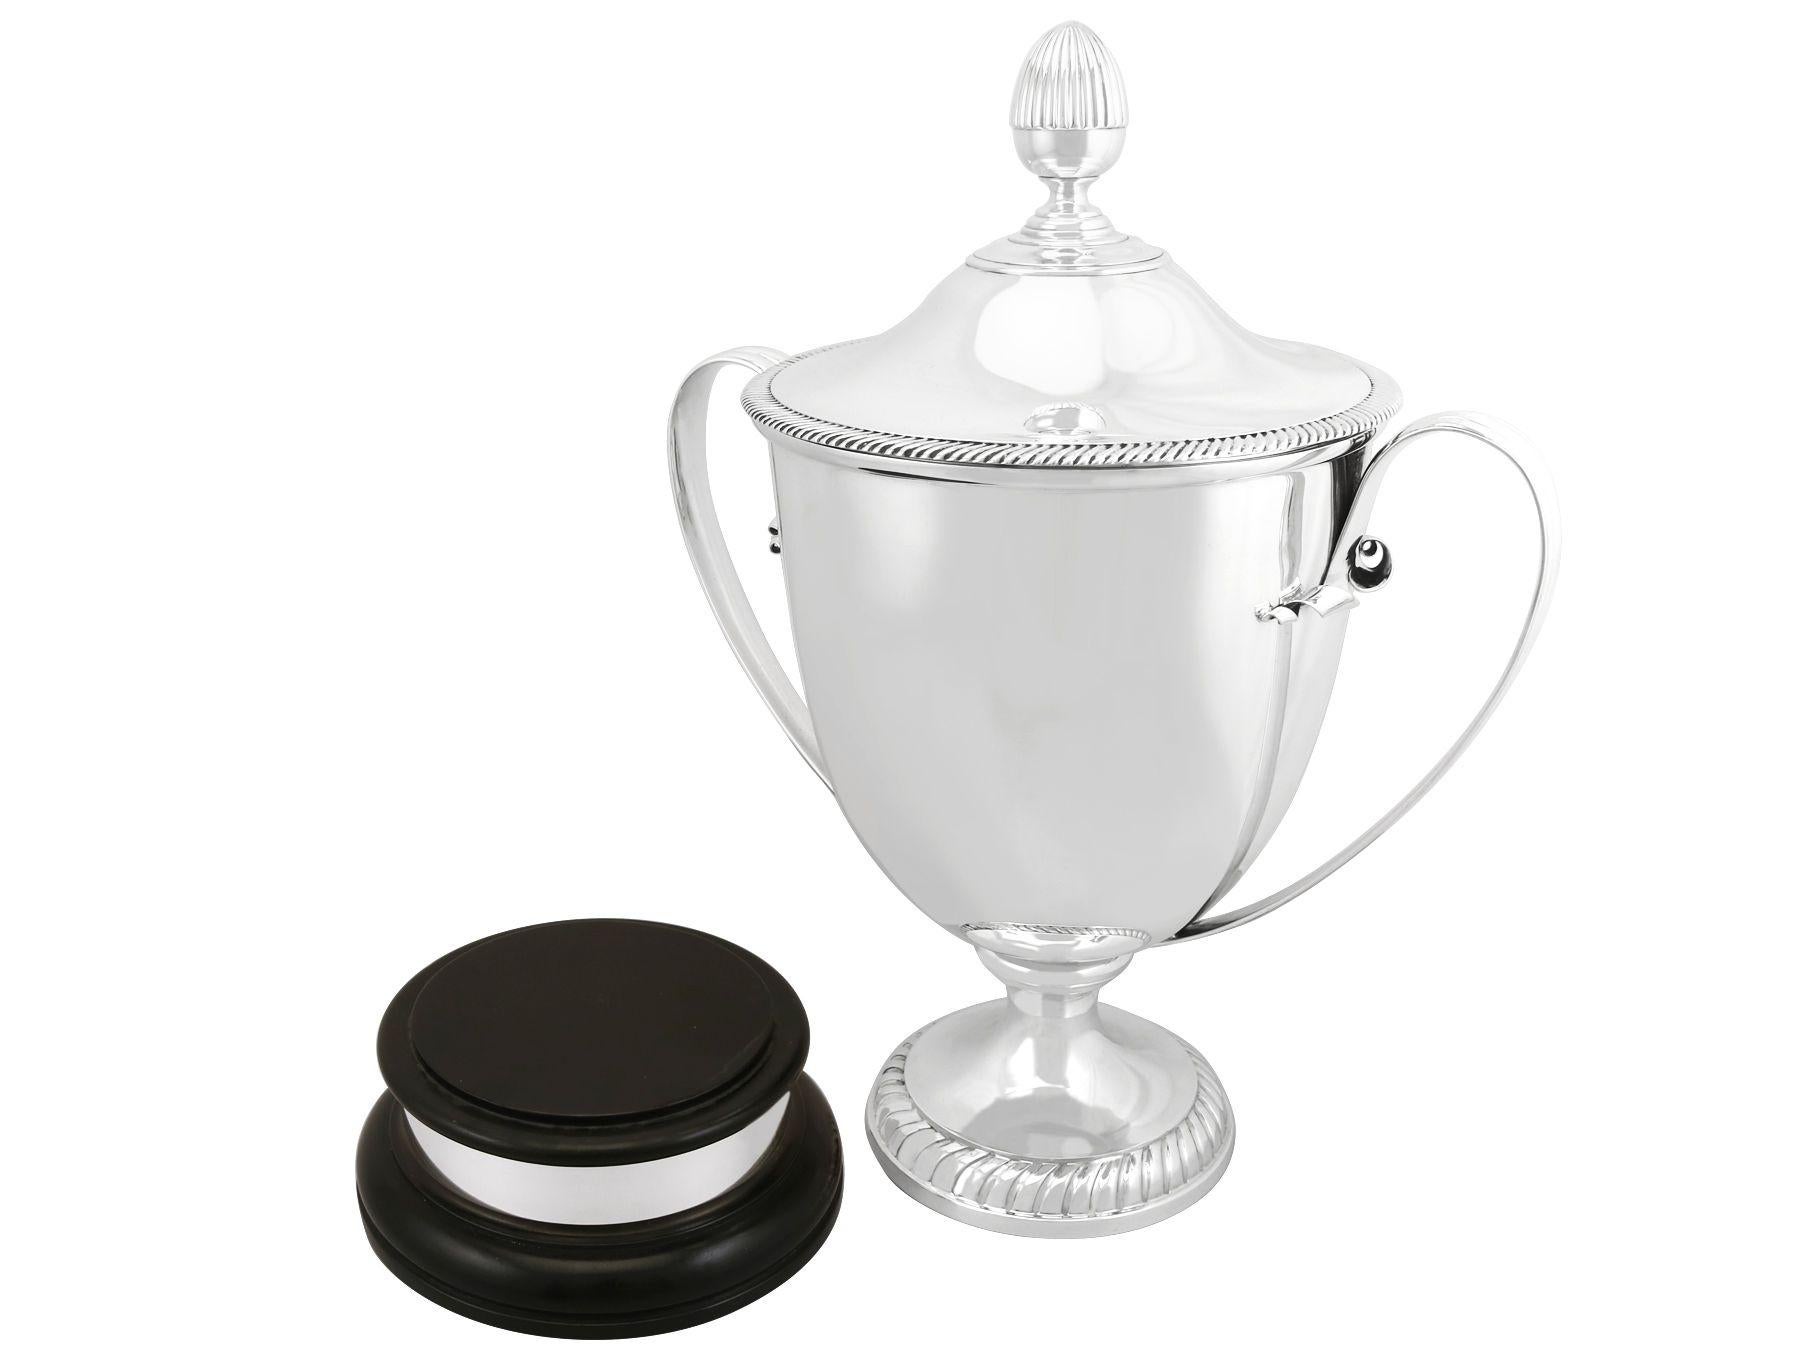 A magnificent, fine and impressive, large antique Edwardian English sterling silver presentation cup and cover; an addition to our presentation silverware collection.

This magnificent antique Edwardian sterling silver cup and cover has a plain